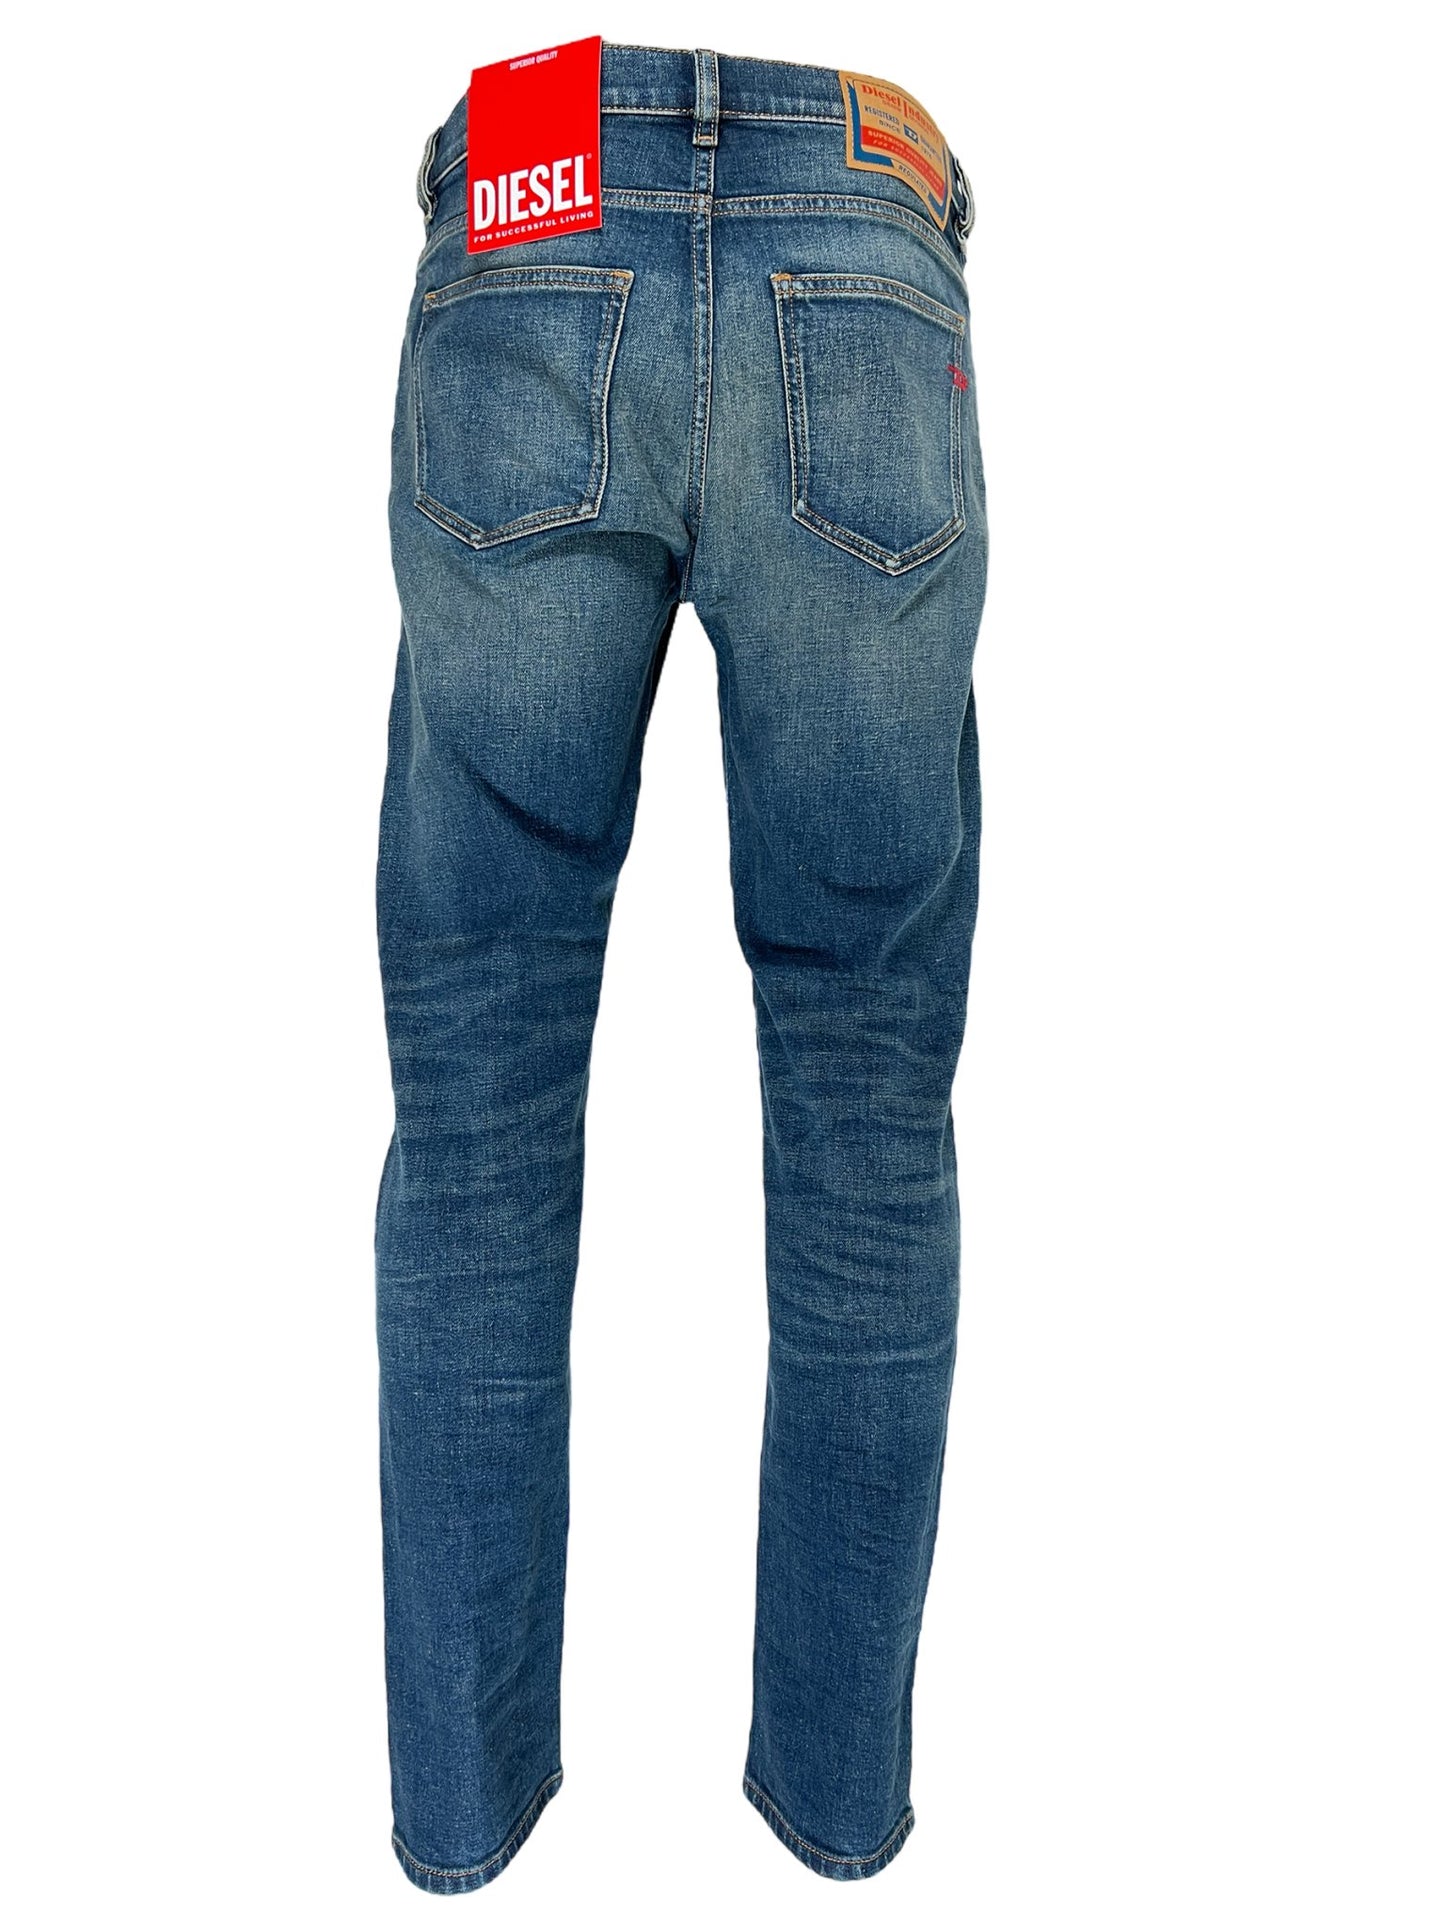 A pair of DIESEL 1979 SLEENKER 9H69 DENIM style jeans with a red tag on the back.